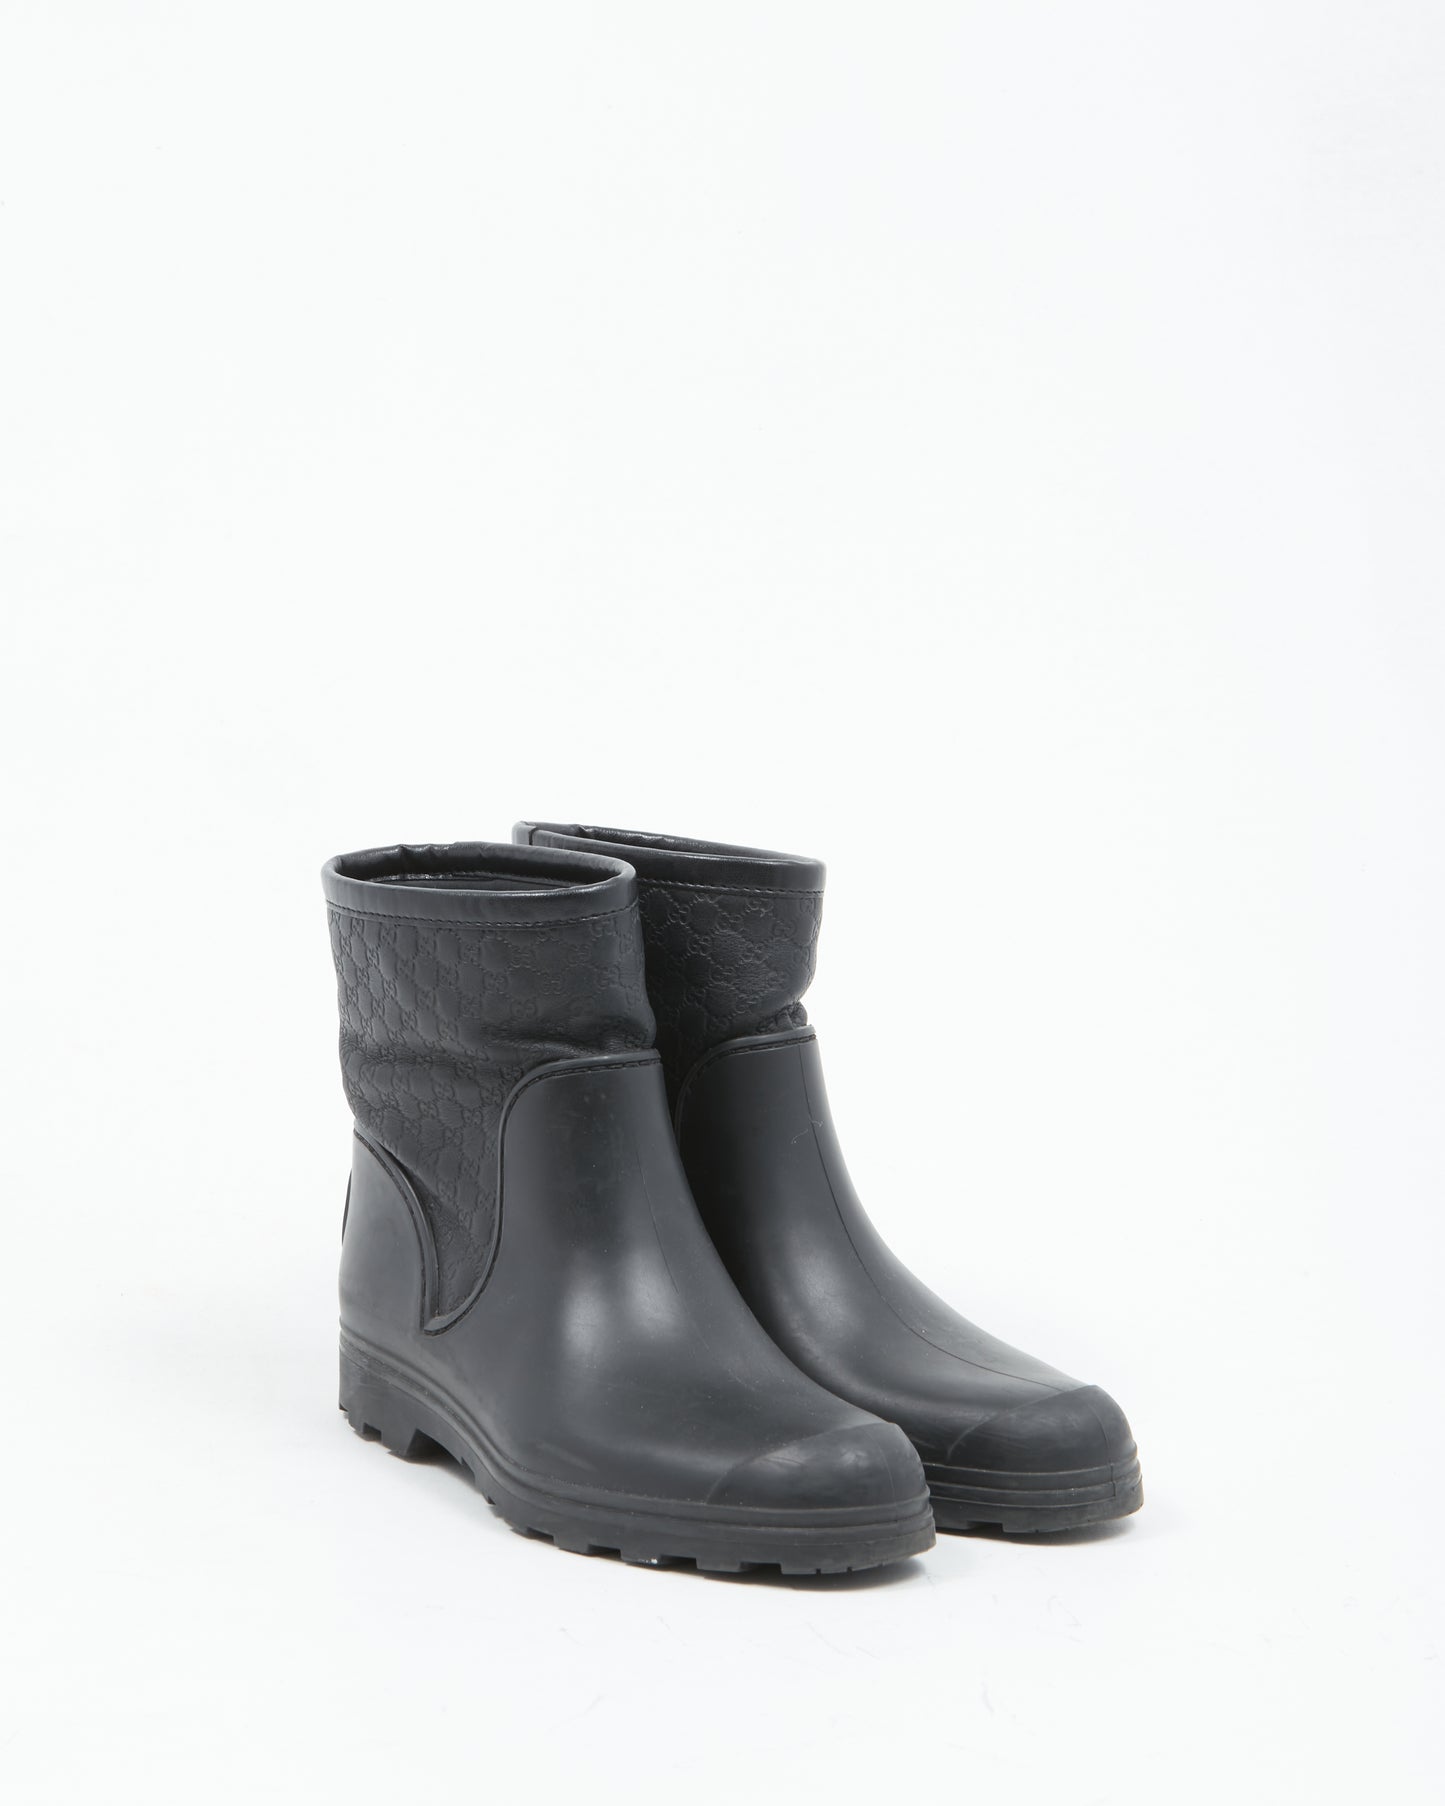 Gucci Black Rubber/Leather GG Rainboots - 36